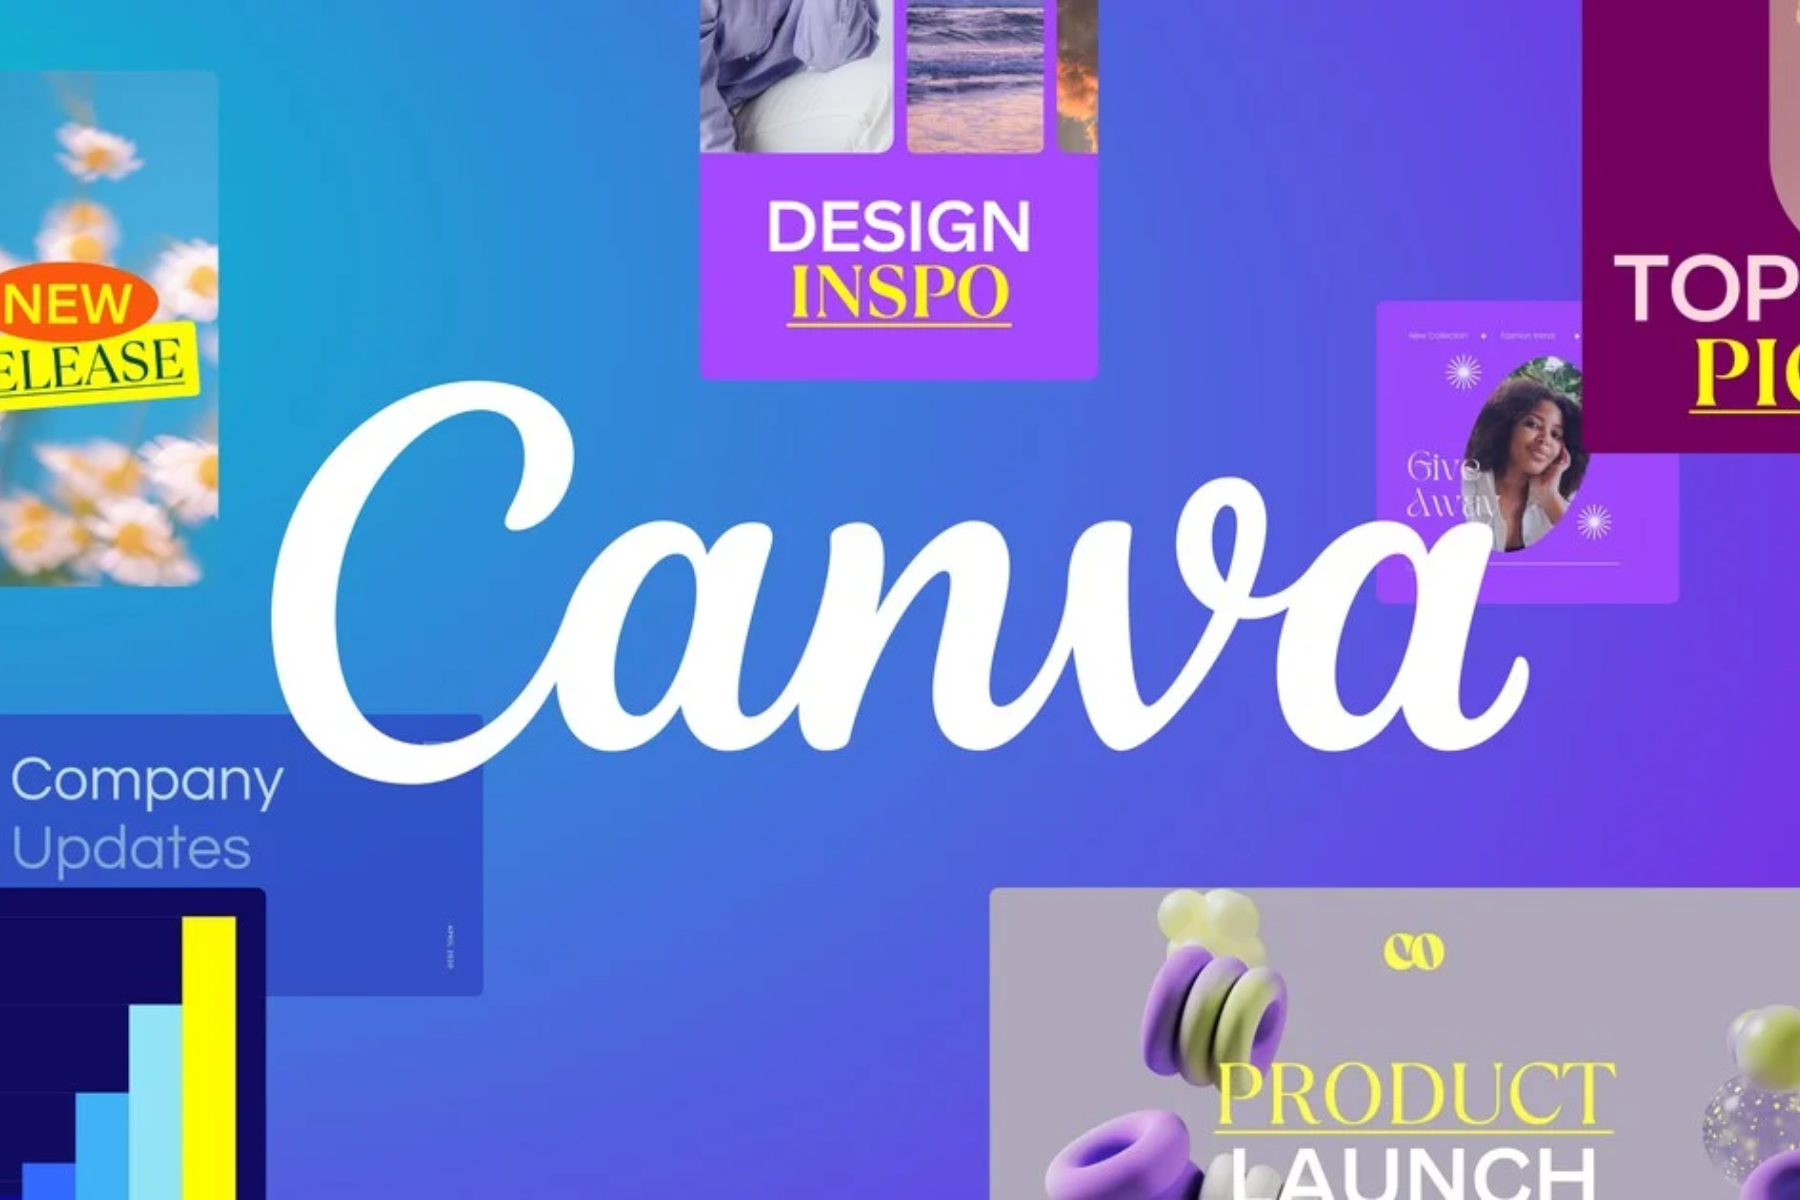 Canva empowers users with user-friendly graphic design tools, democratizing design and enabling creative expression. Led by CEO Melanie Perkins, Canva is a testament to the impact of female entrepreneurship.